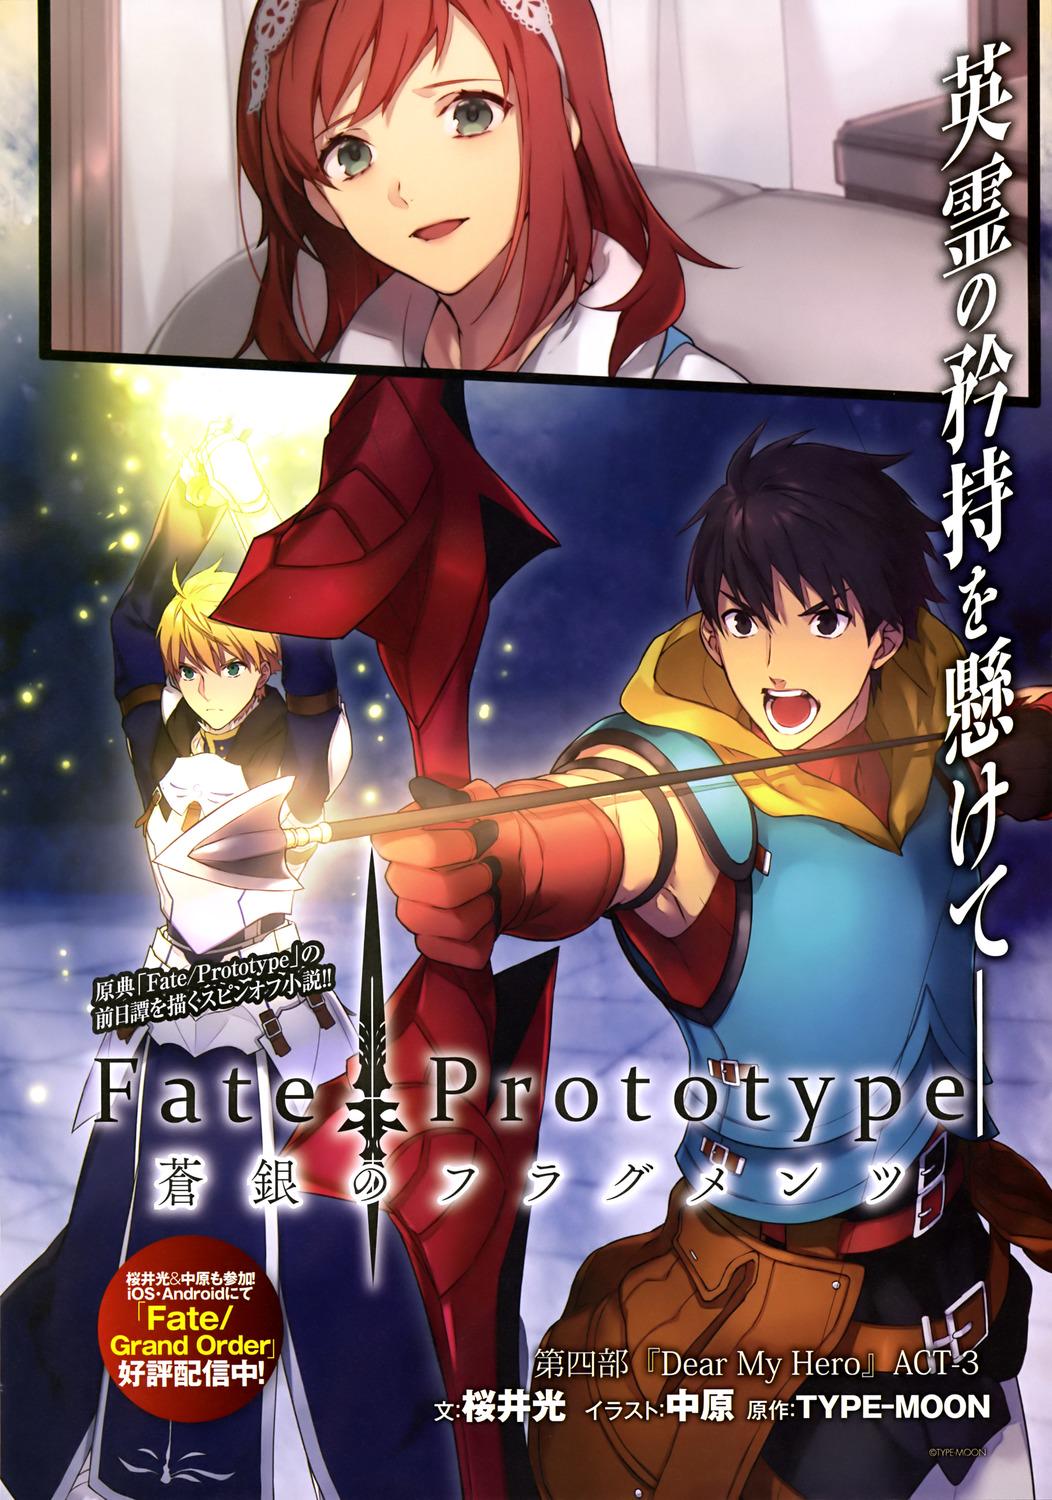 Pkjd Fate Prototype Scans T Co Pmzhqklfu5 Http T Co 54vb0hsbct Twitter